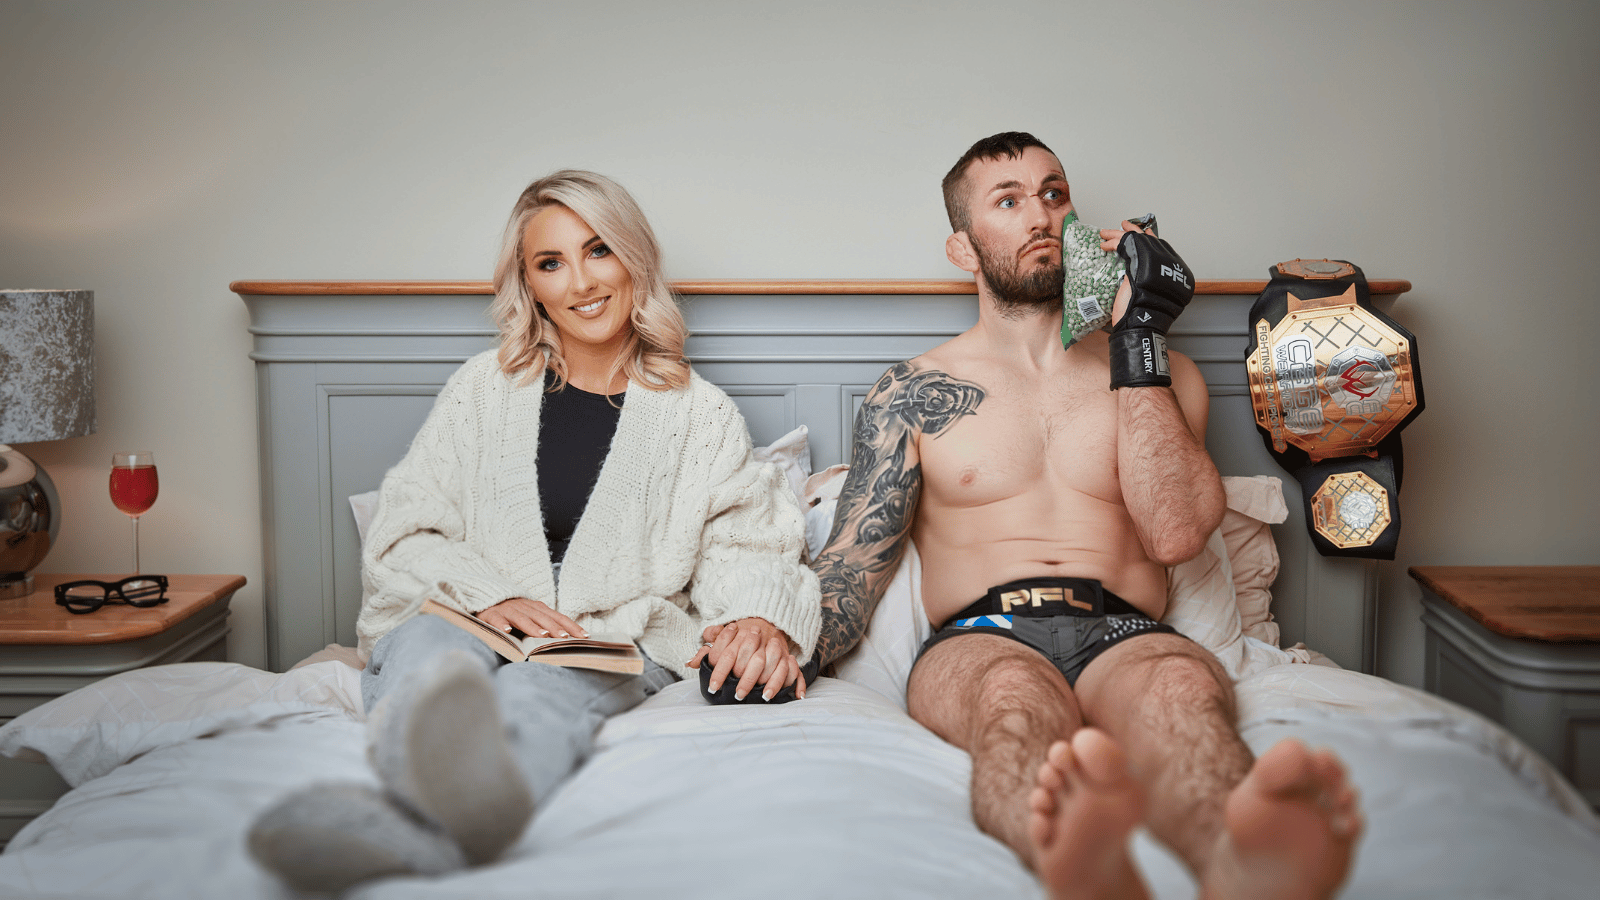 Natalie and her MMA husband Stevie Ray lying on their bed. Natalie wears a dressing gown while Stevie is topless in MMA boxers holding an ice pack to his face.